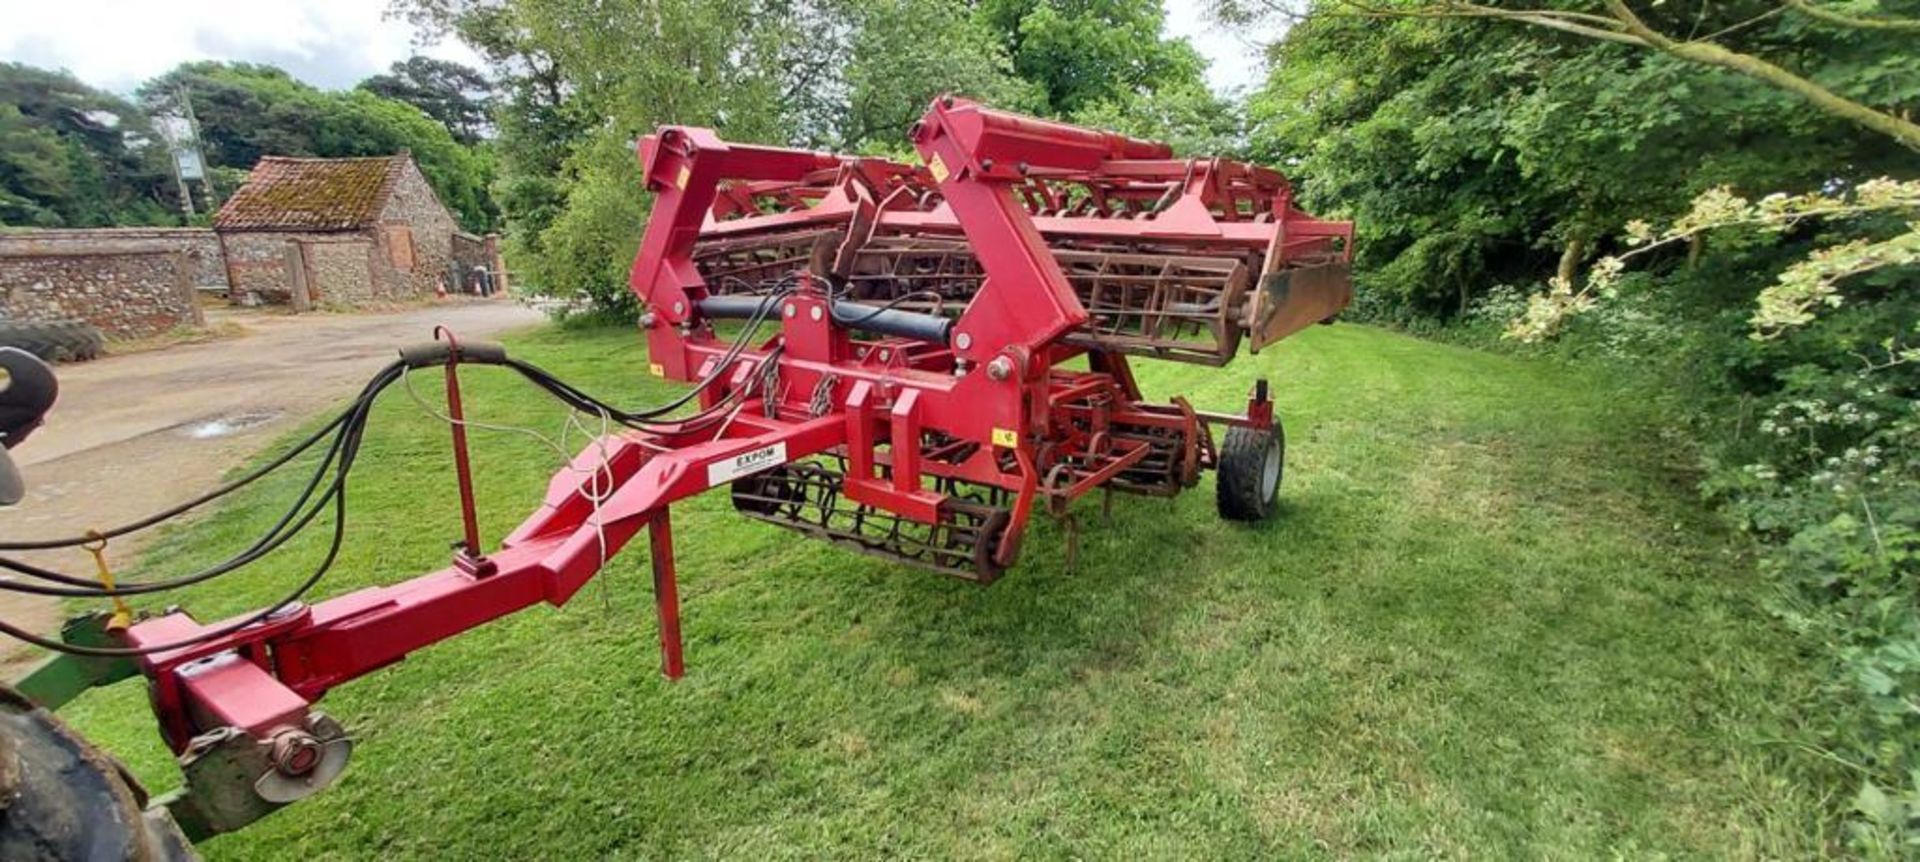 Expom Cultivator - Image 2 of 10